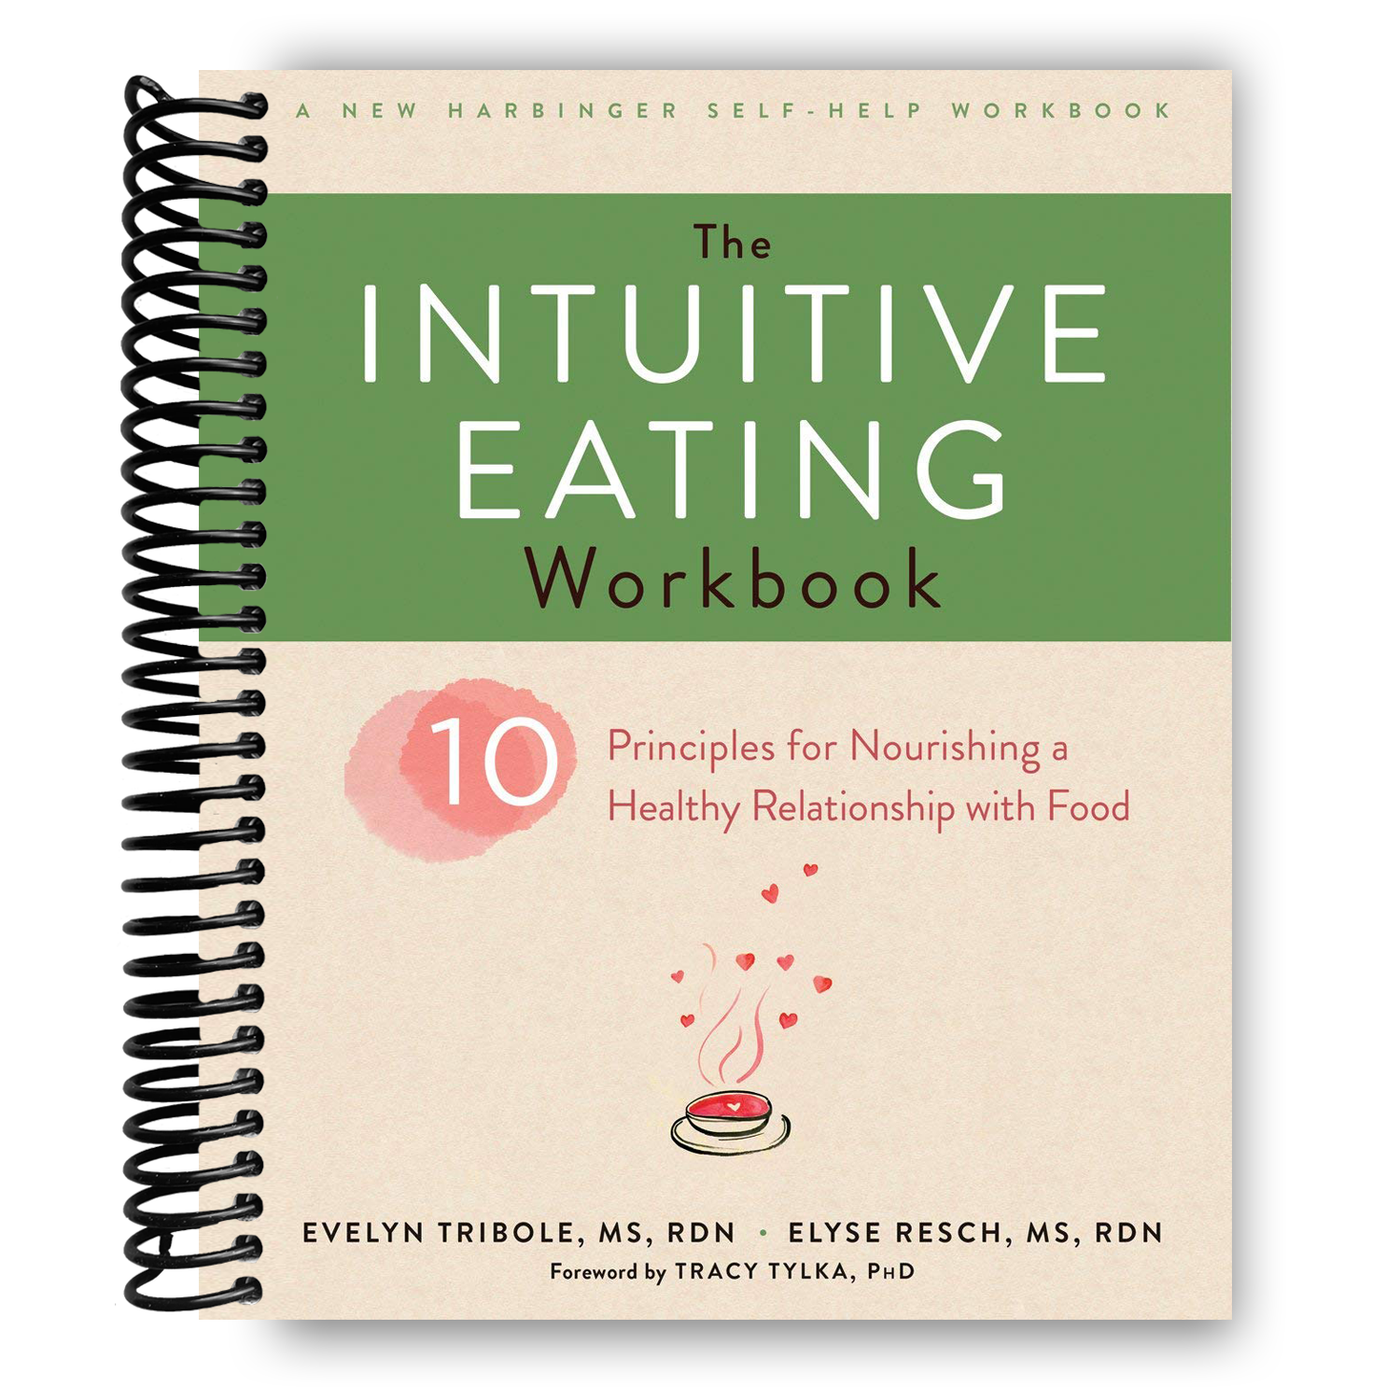 The Intuitive Eating Workbook:Ten Principles for Nourishing a Healthy Relationship with Food (Spiral Bound)